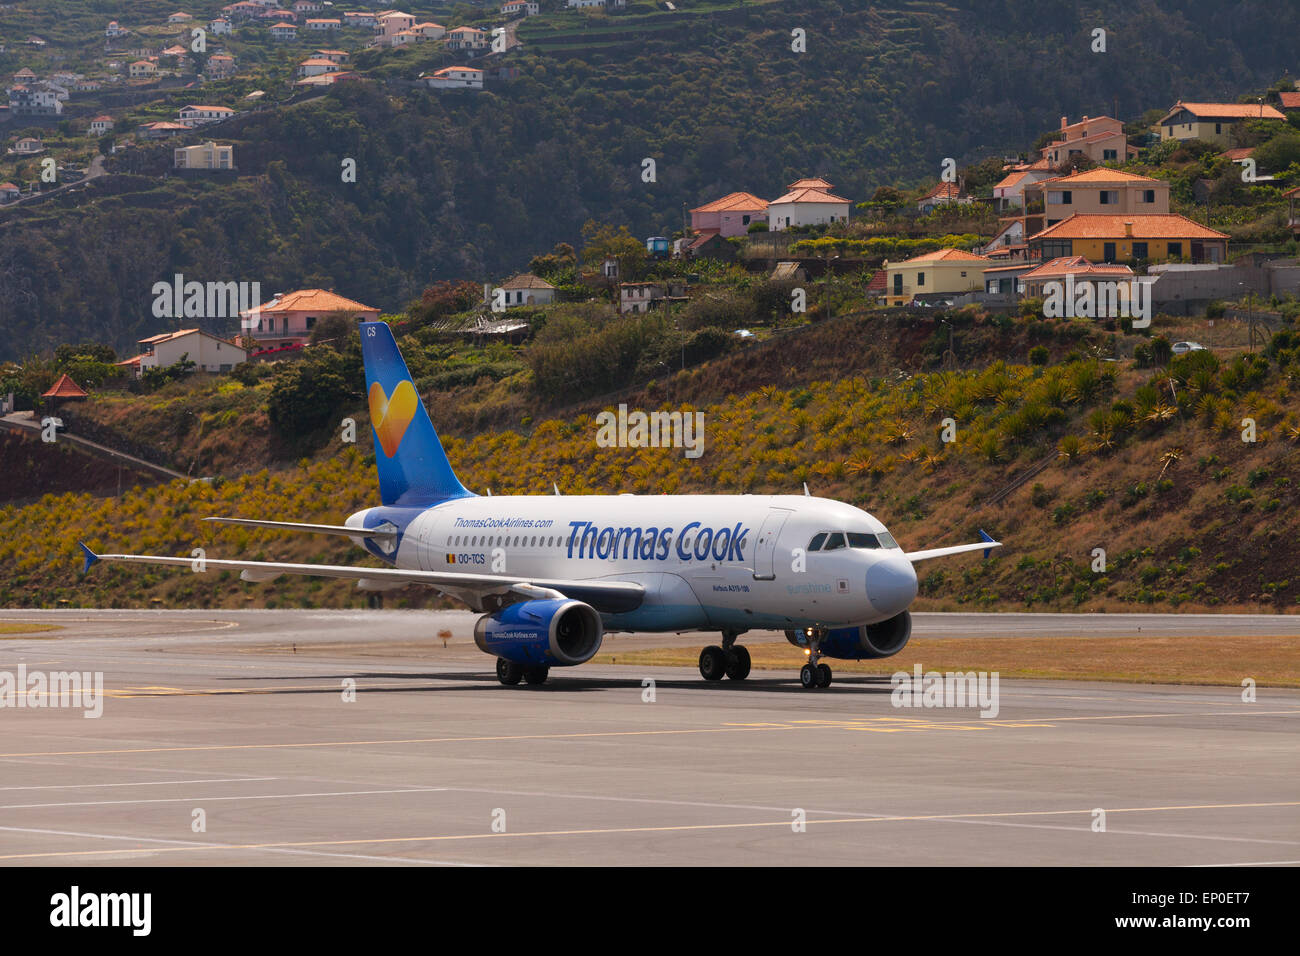 A Thomas Cook airlines plane on the ground at Funchal airport, Madeira, Europe Stock Photo